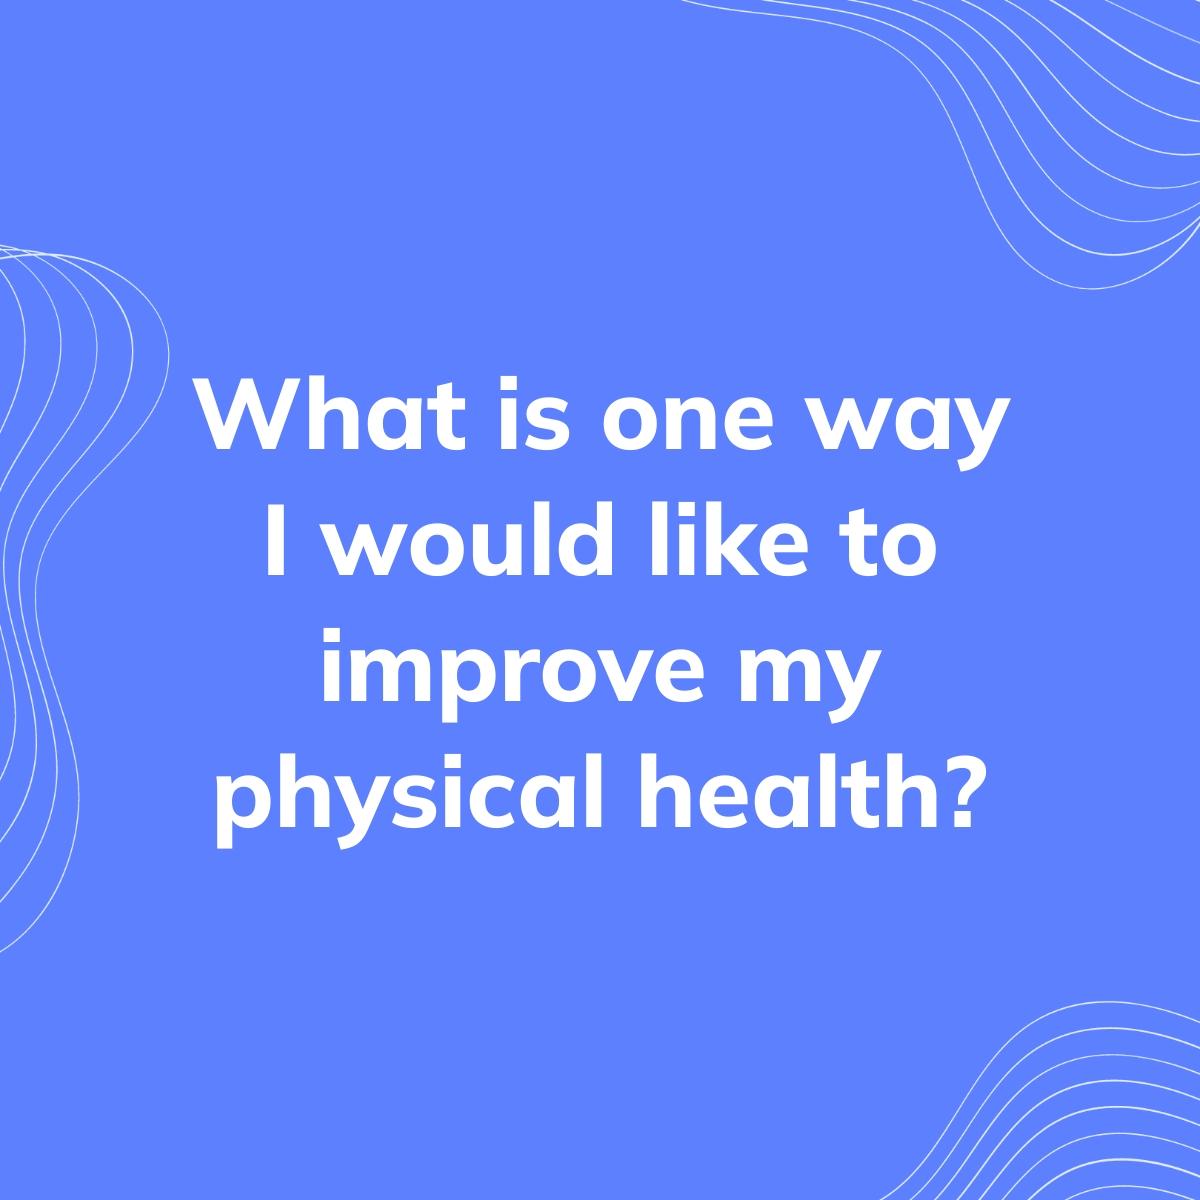 Journal Prompt: What is one way I would like to improve my physical health?